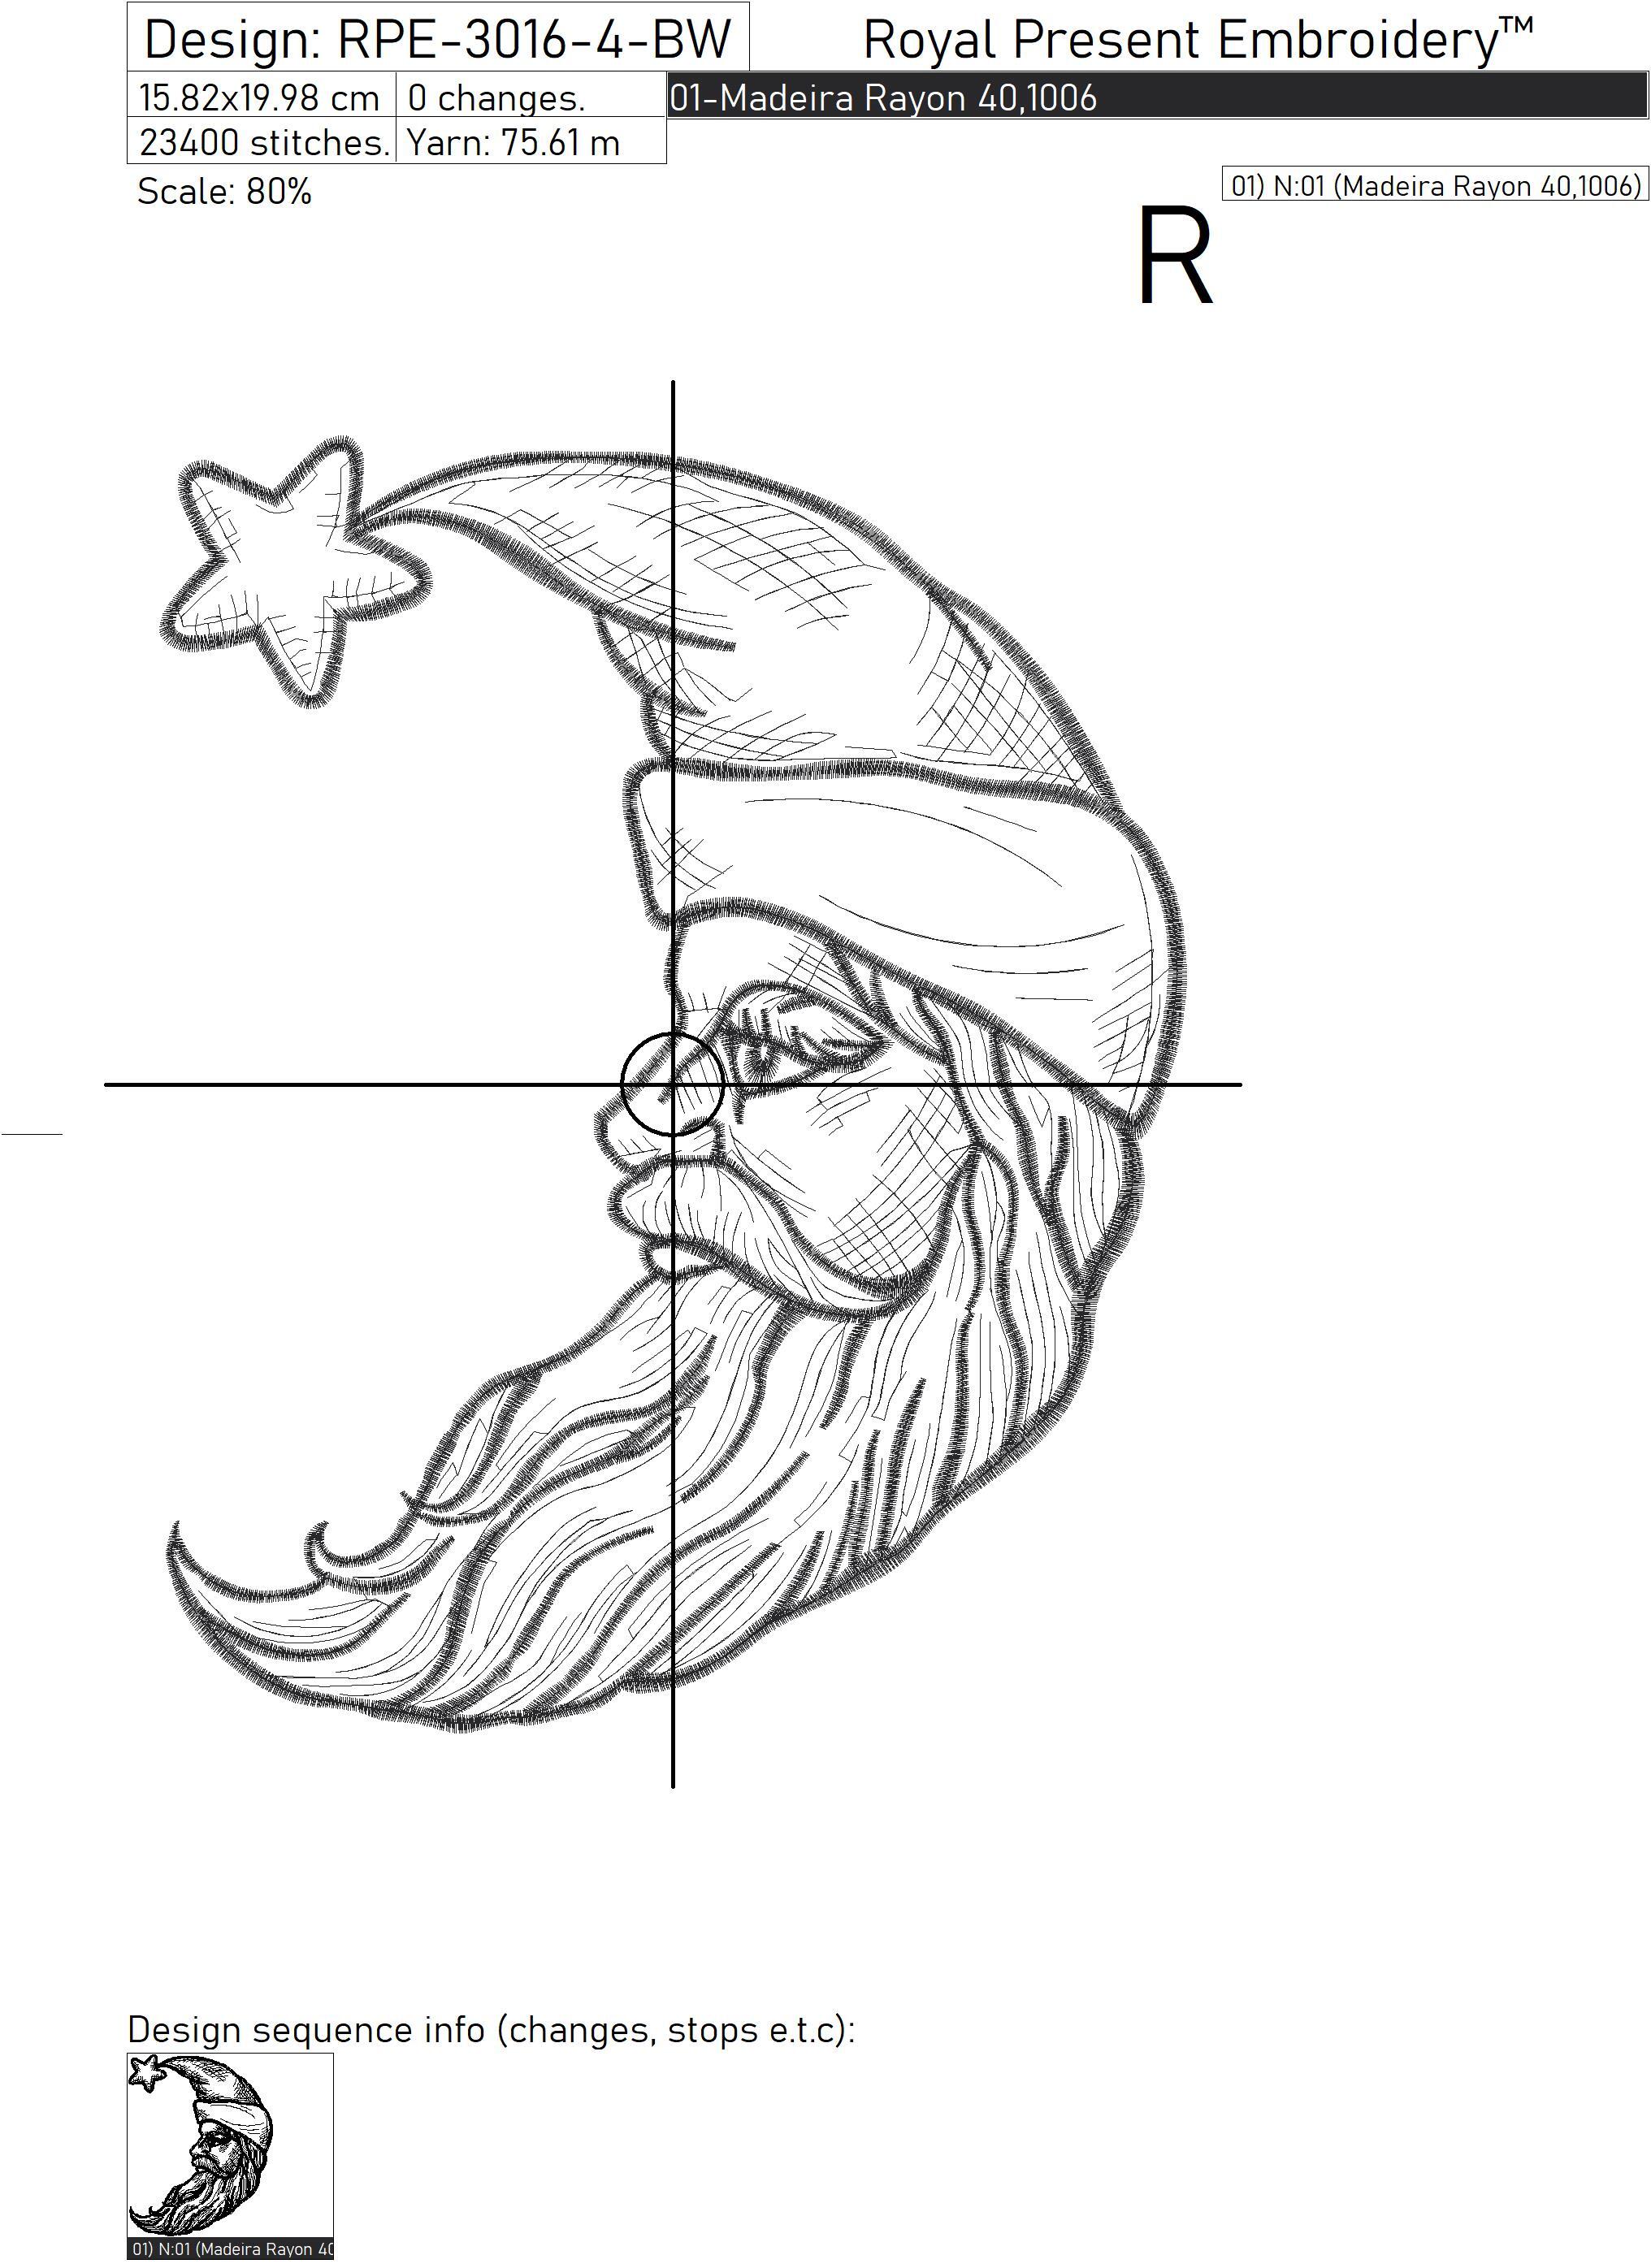 Moon Santa Claus Vintage Machine Embroidery Design 4 Sizes Royal Present Embroidery